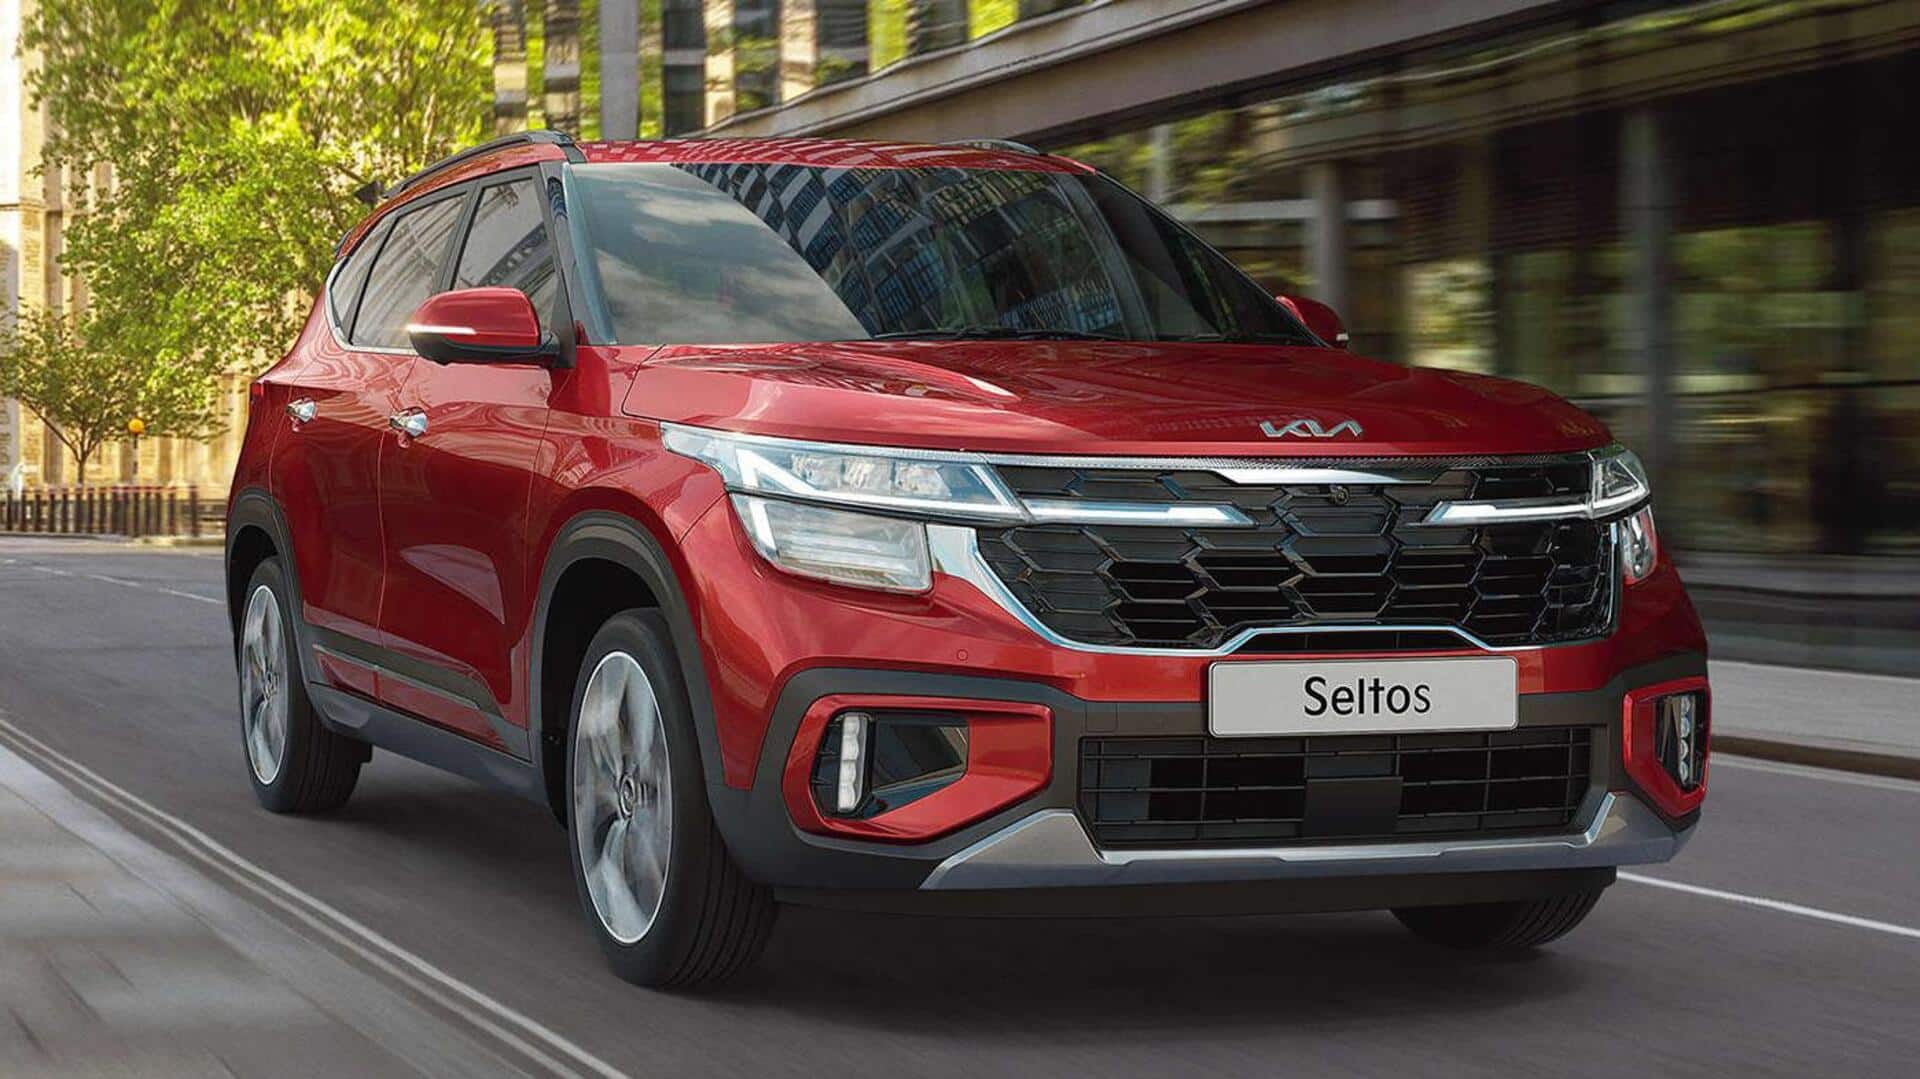 Price hike announced for select variants of 2023 Kia Seltos